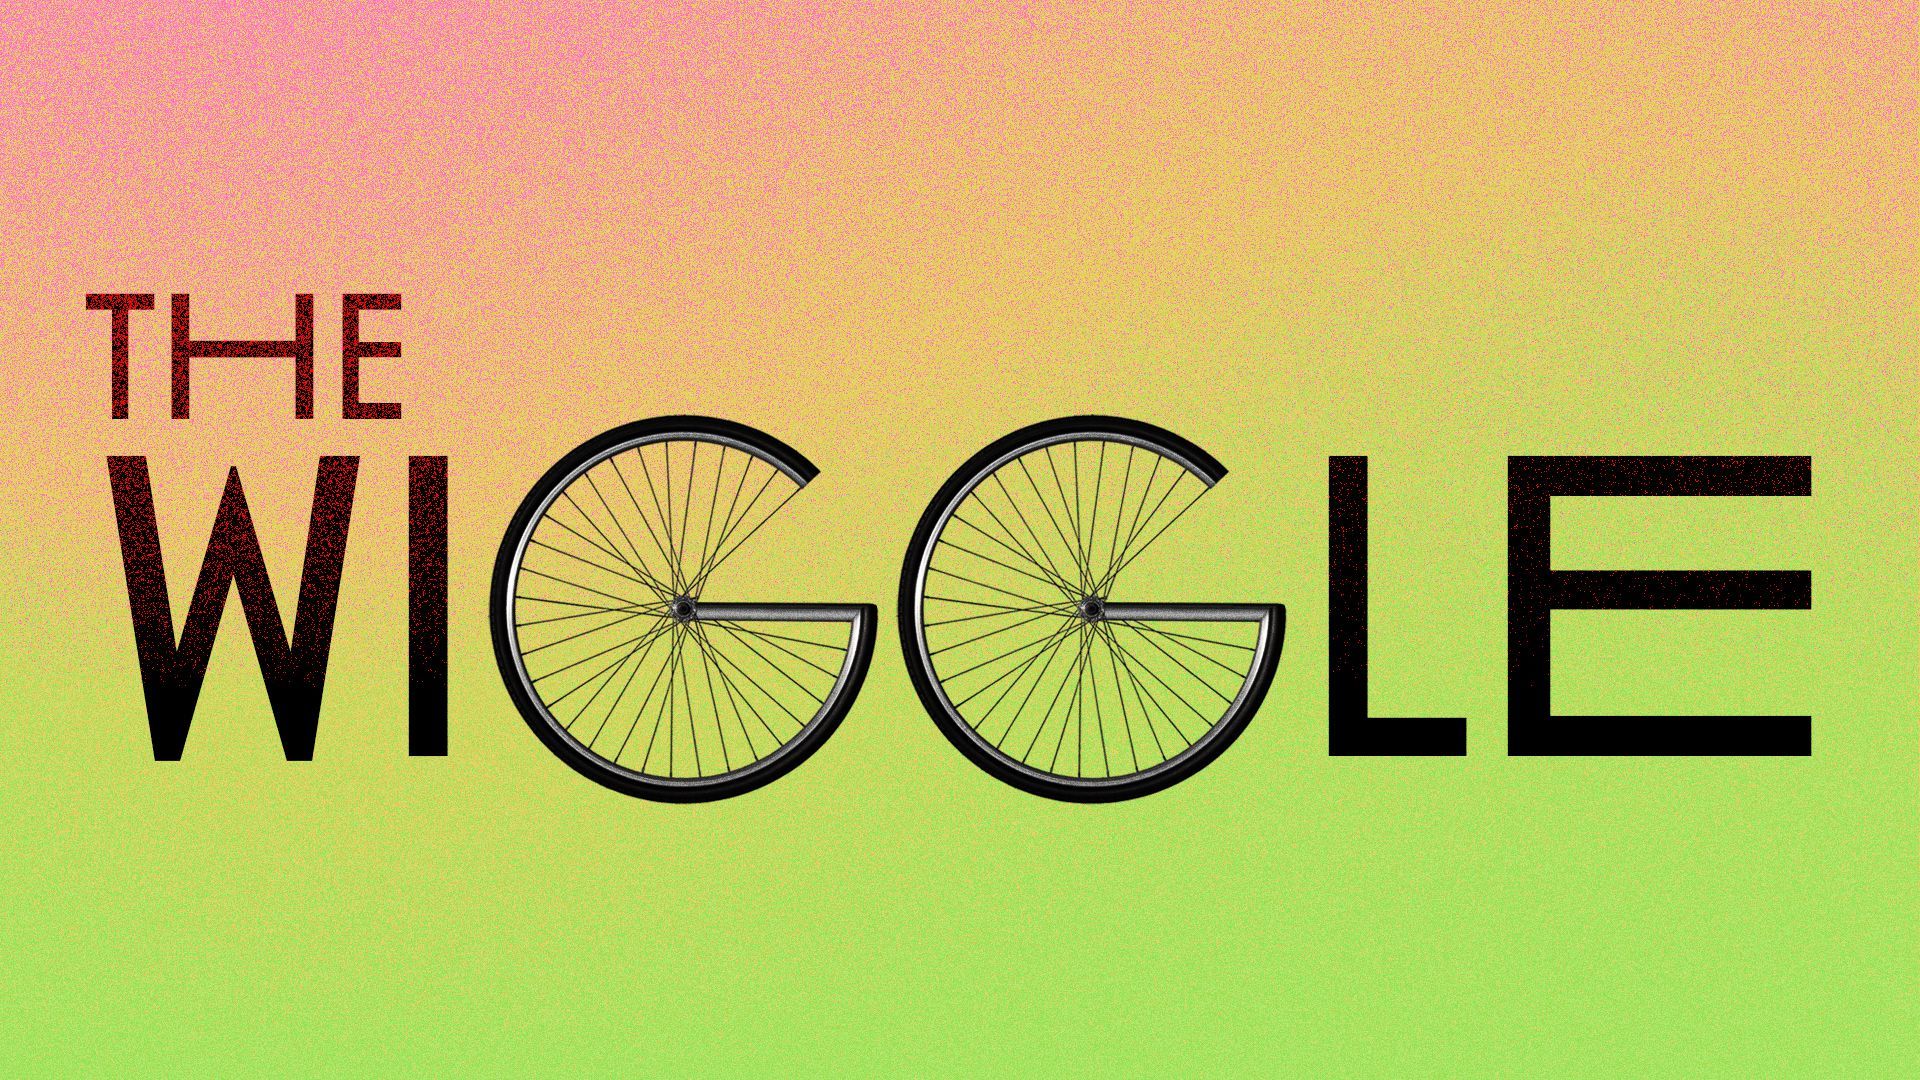 Illustration of "The Wiggle" with the G's replaced with bike wheels.